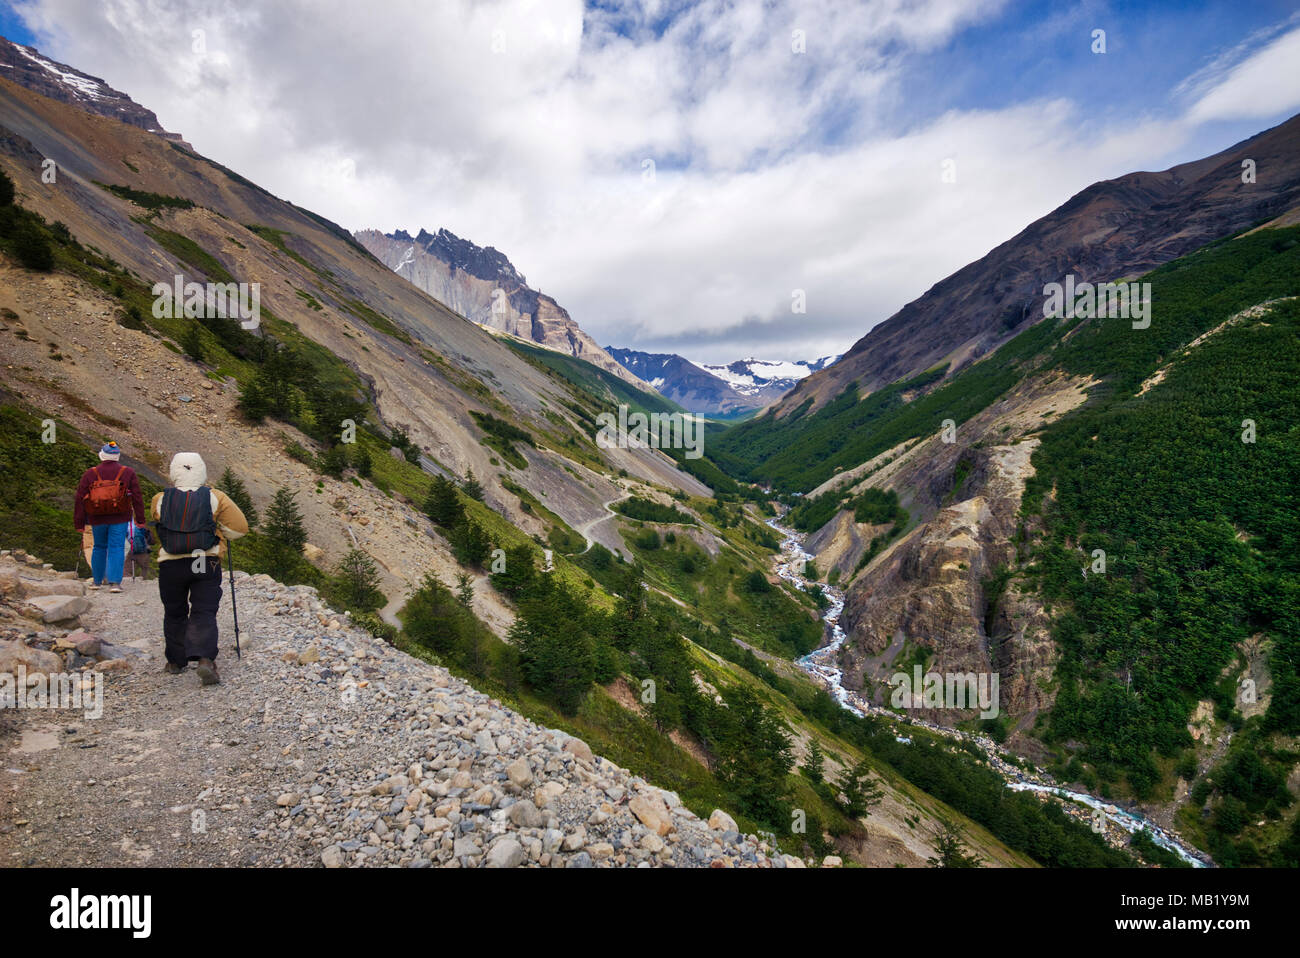 Hiking trail in the Ascencio River valley, Patagonia, Chile. Stock Photo